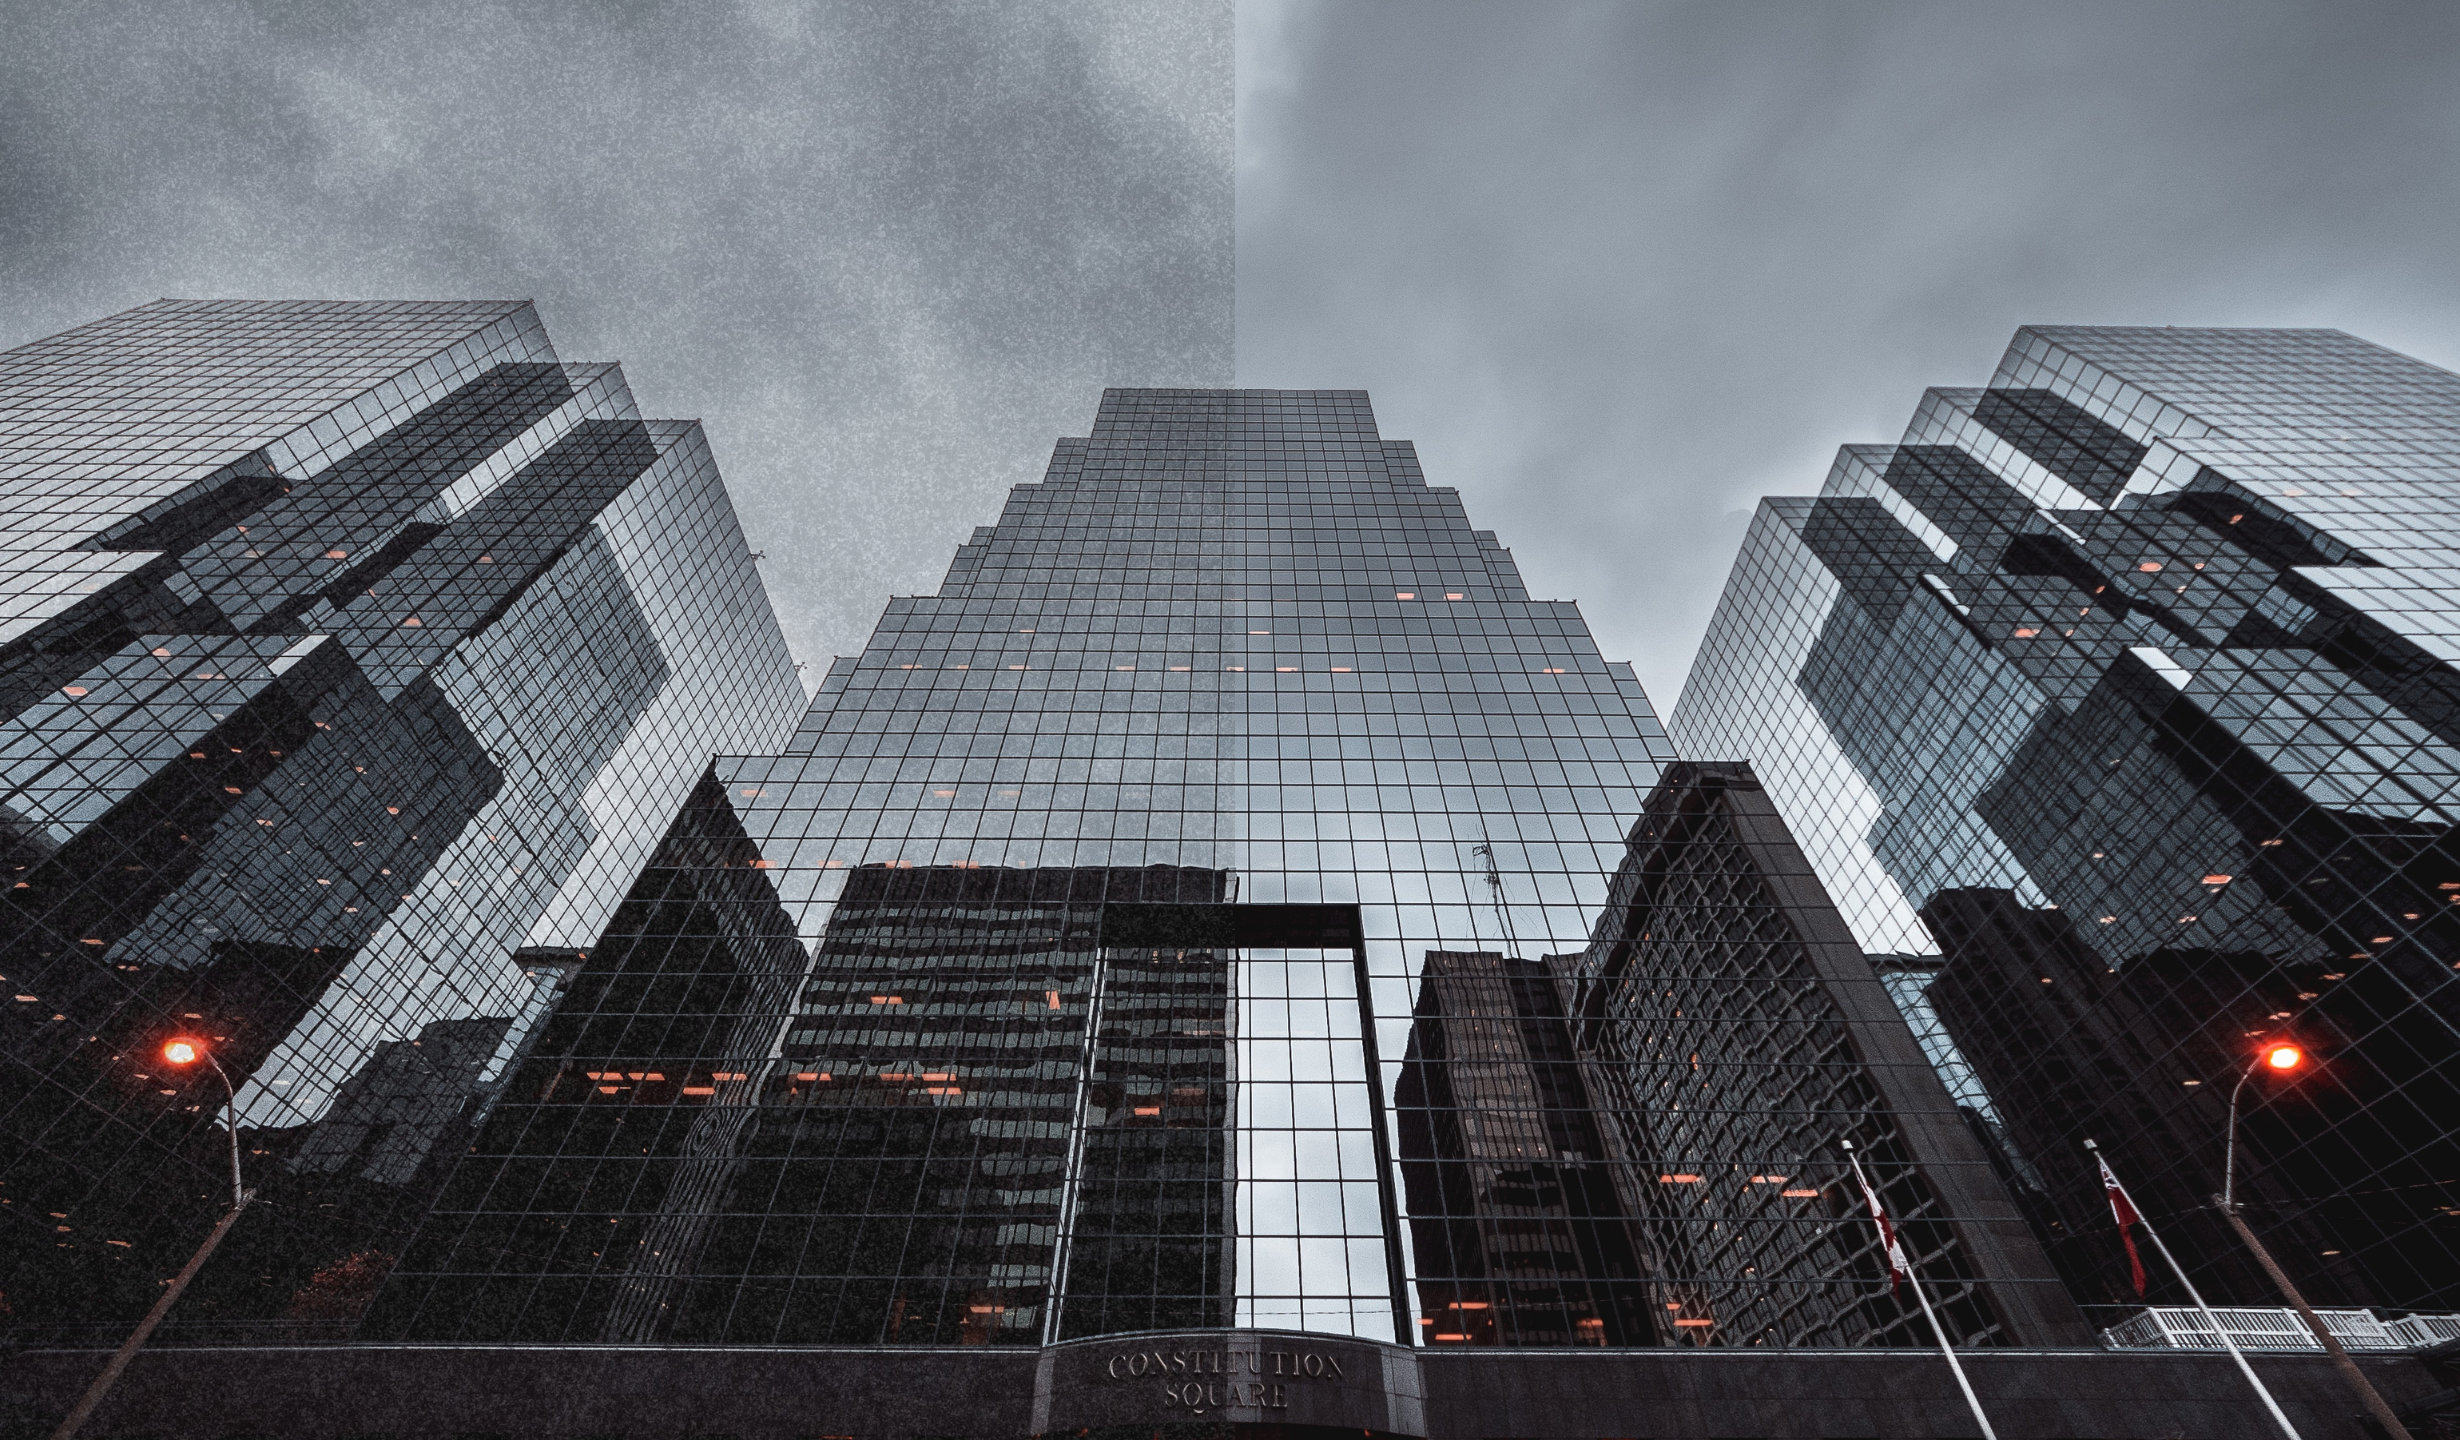 Grey reflective city buildings. Half of the image features image noise. 